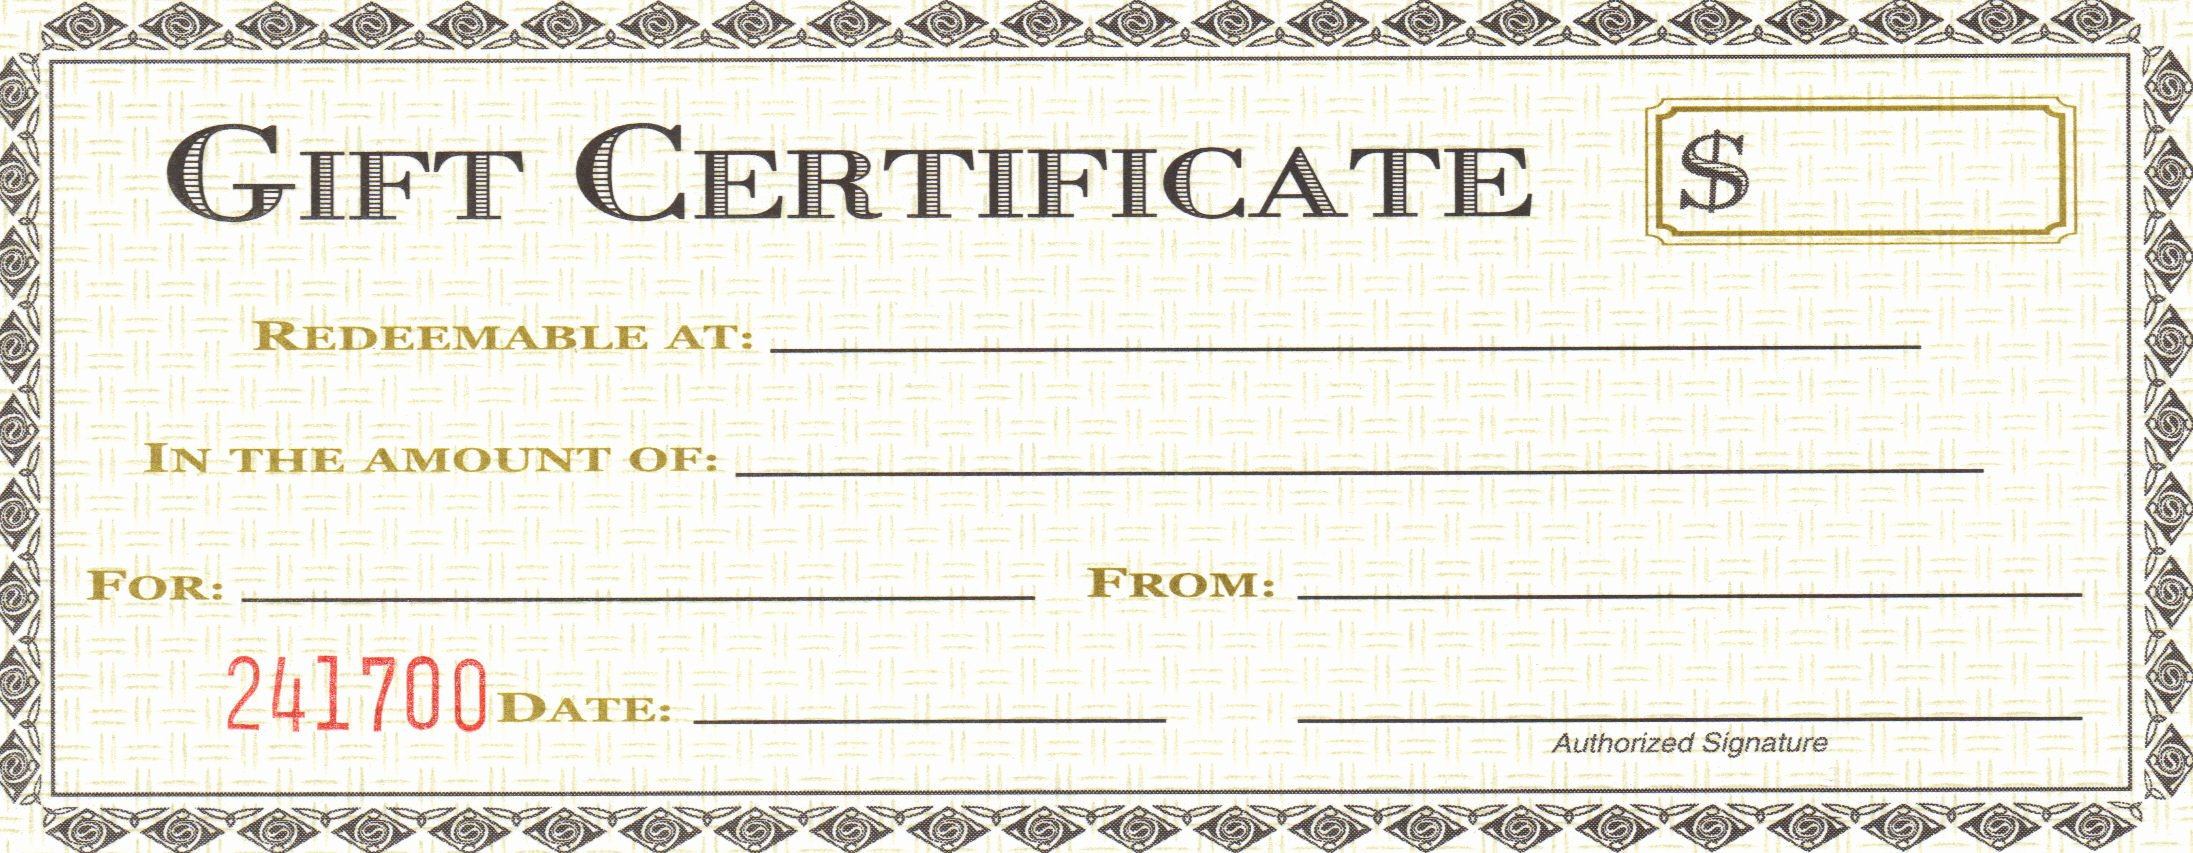 18 Gift Certificate Templates Excel Pdf formats